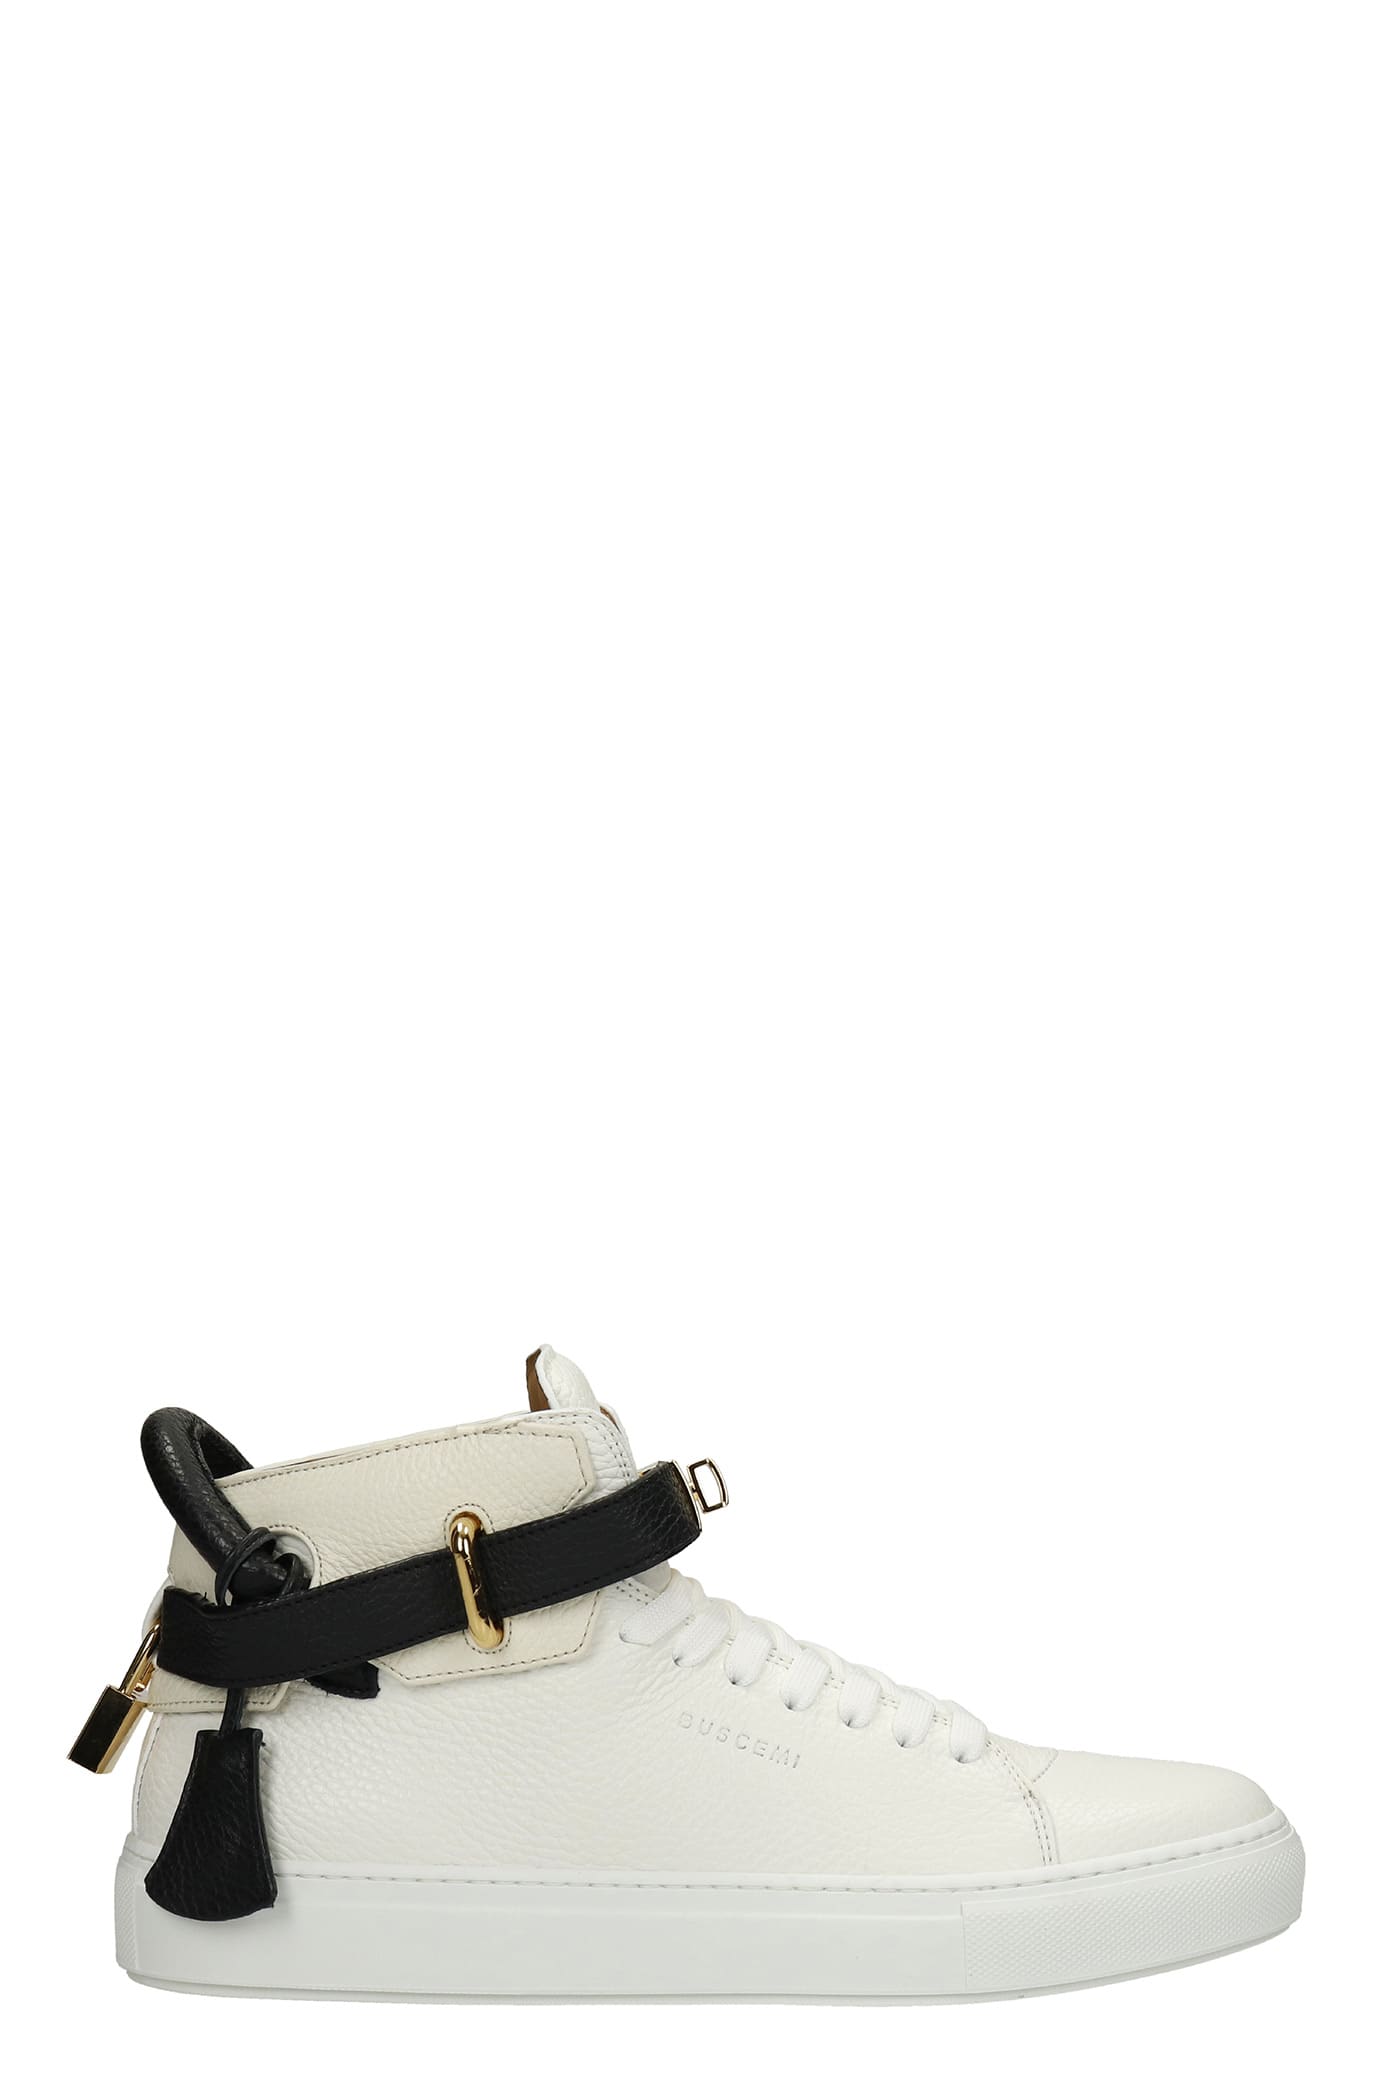 BUSCEMI BUSCEMI 100MM SNEAKERS IN WHITE LEATHER,BCW21702678